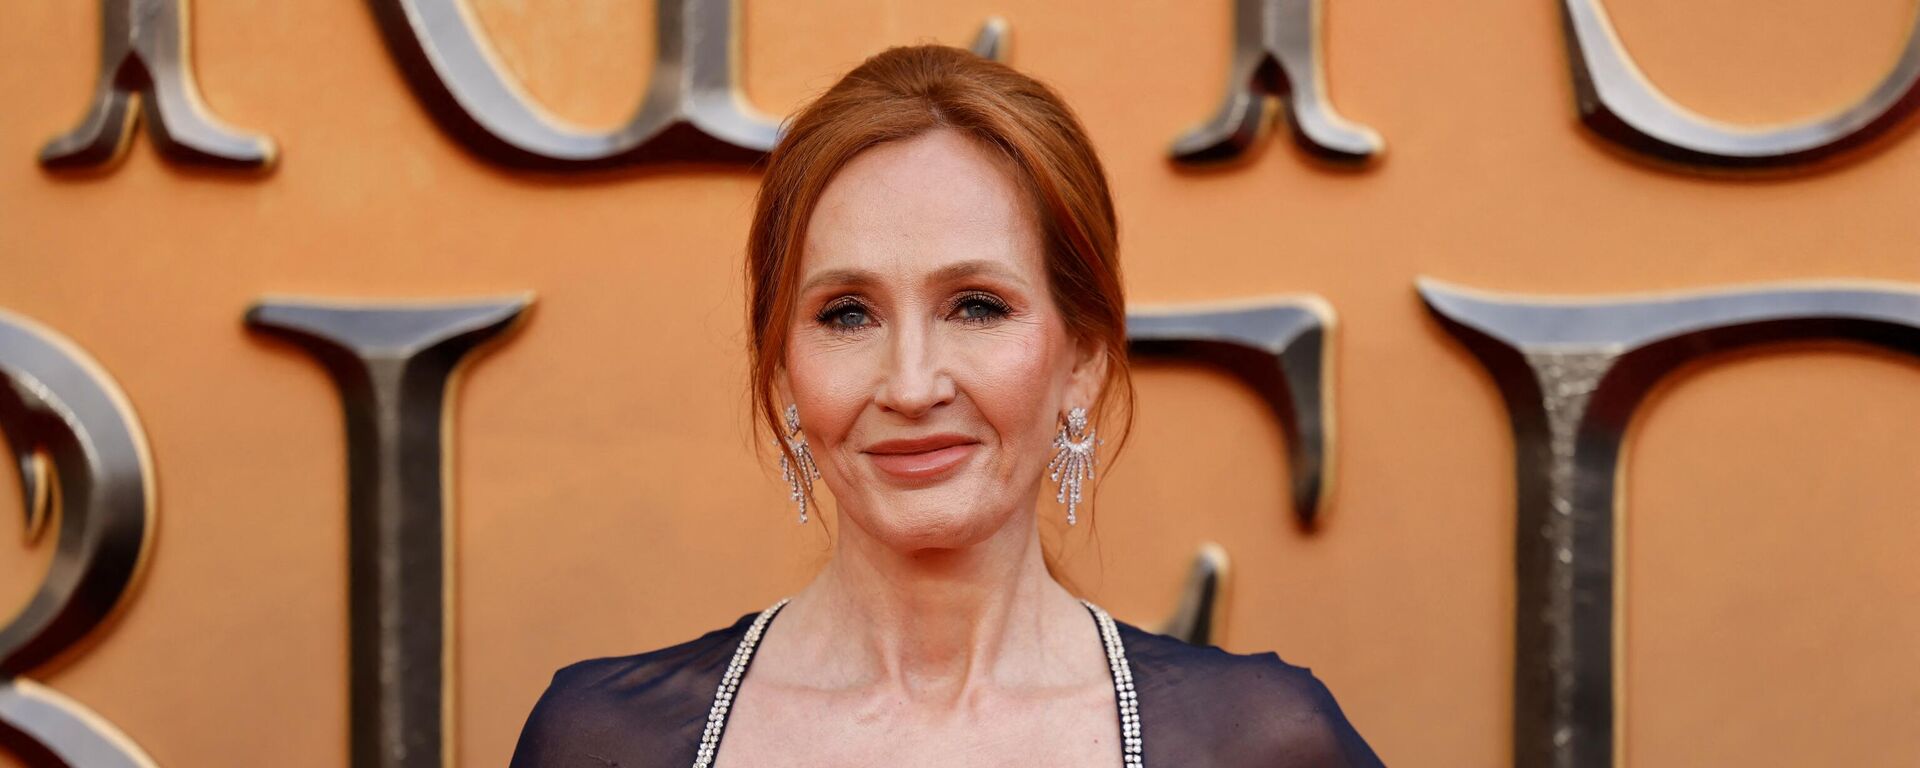 British writer J.K Rowling poses on the red carpet after arriving to attend the World Premiere of the film Fantastic Beasts: The Secrets of Dumbledore in London on March 29, 2022. - Sputnik International, 1920, 19.06.2022